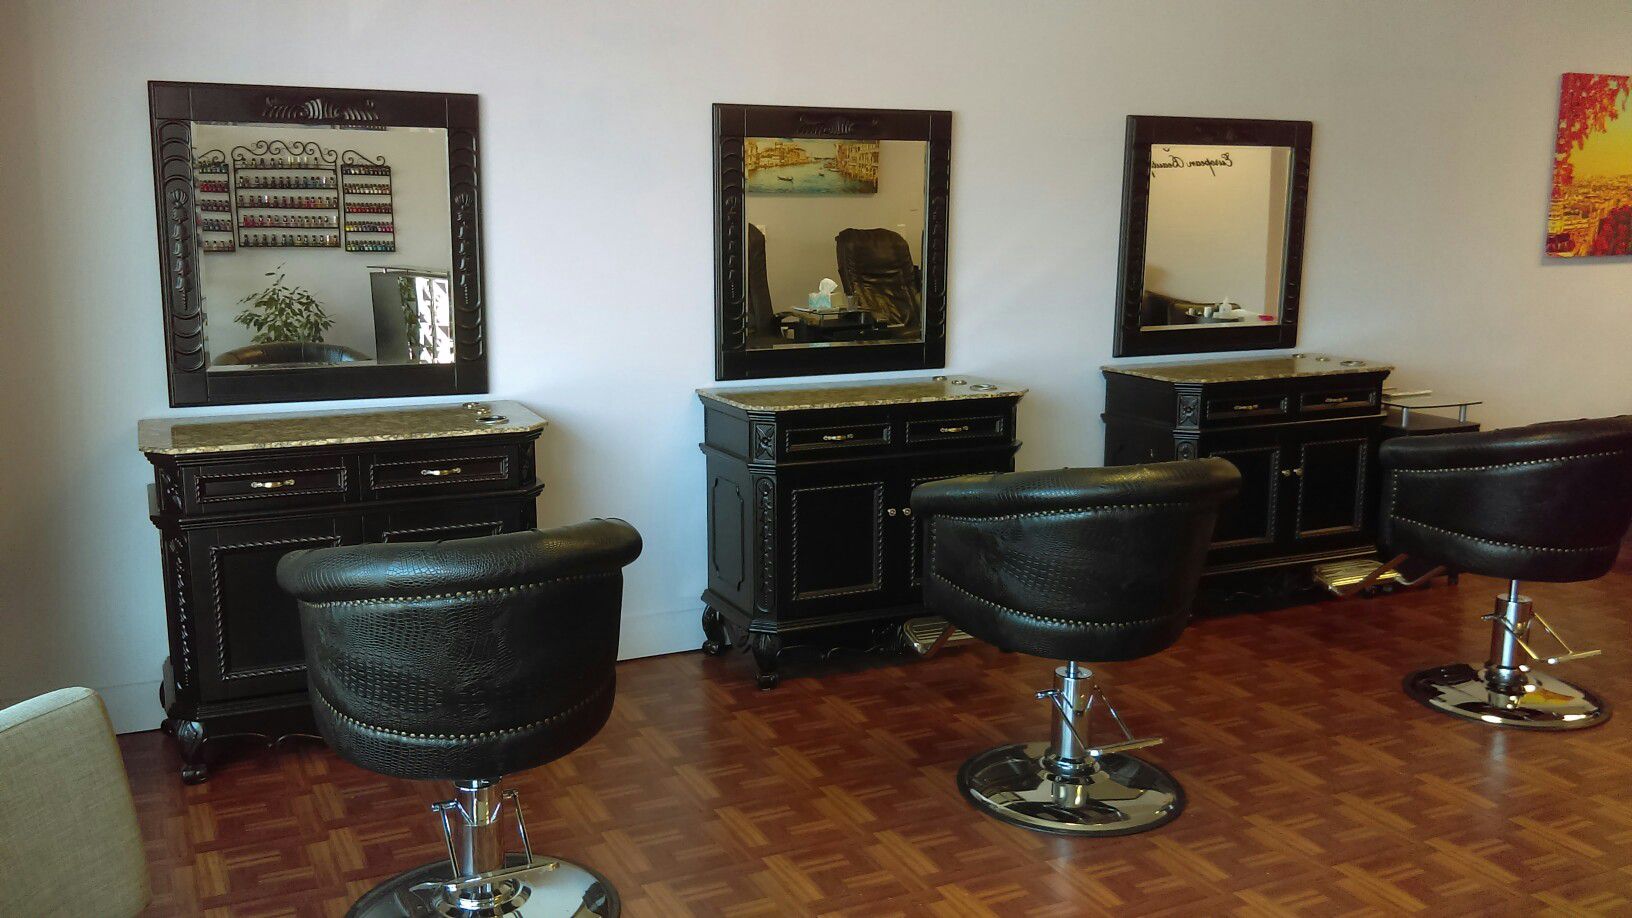 Hair Salon furniture equipment. Salon stations, Salon chairs, styling stations & chairs